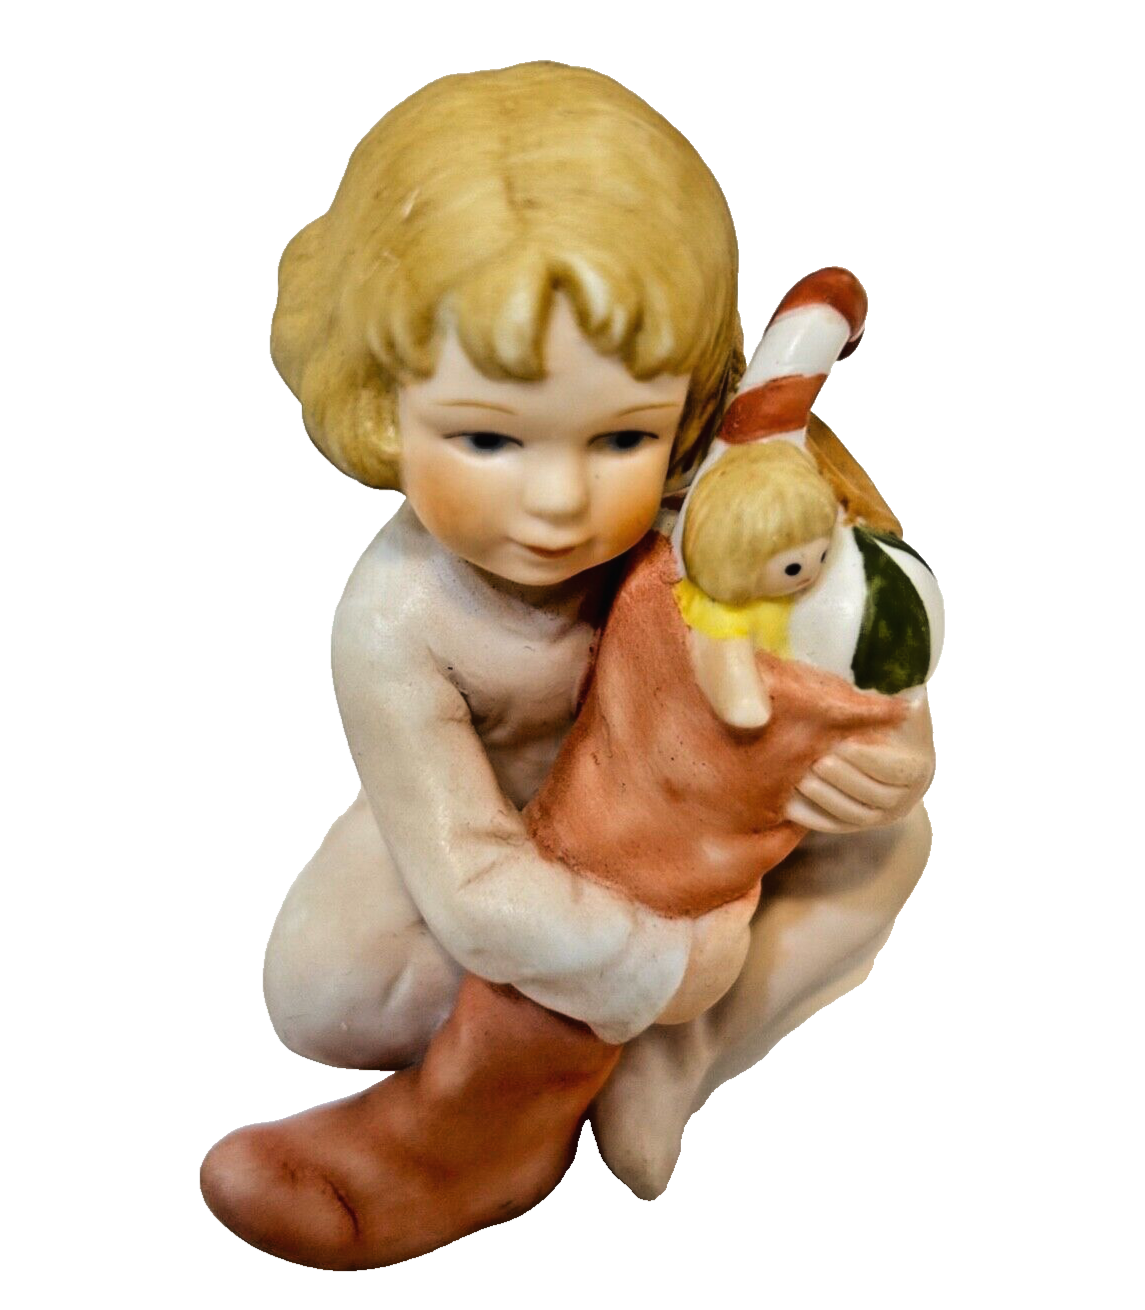 Primary image for Vintage 1982 Enesco Christmas Porcelain Little Girl with Stocking Figurine 3"